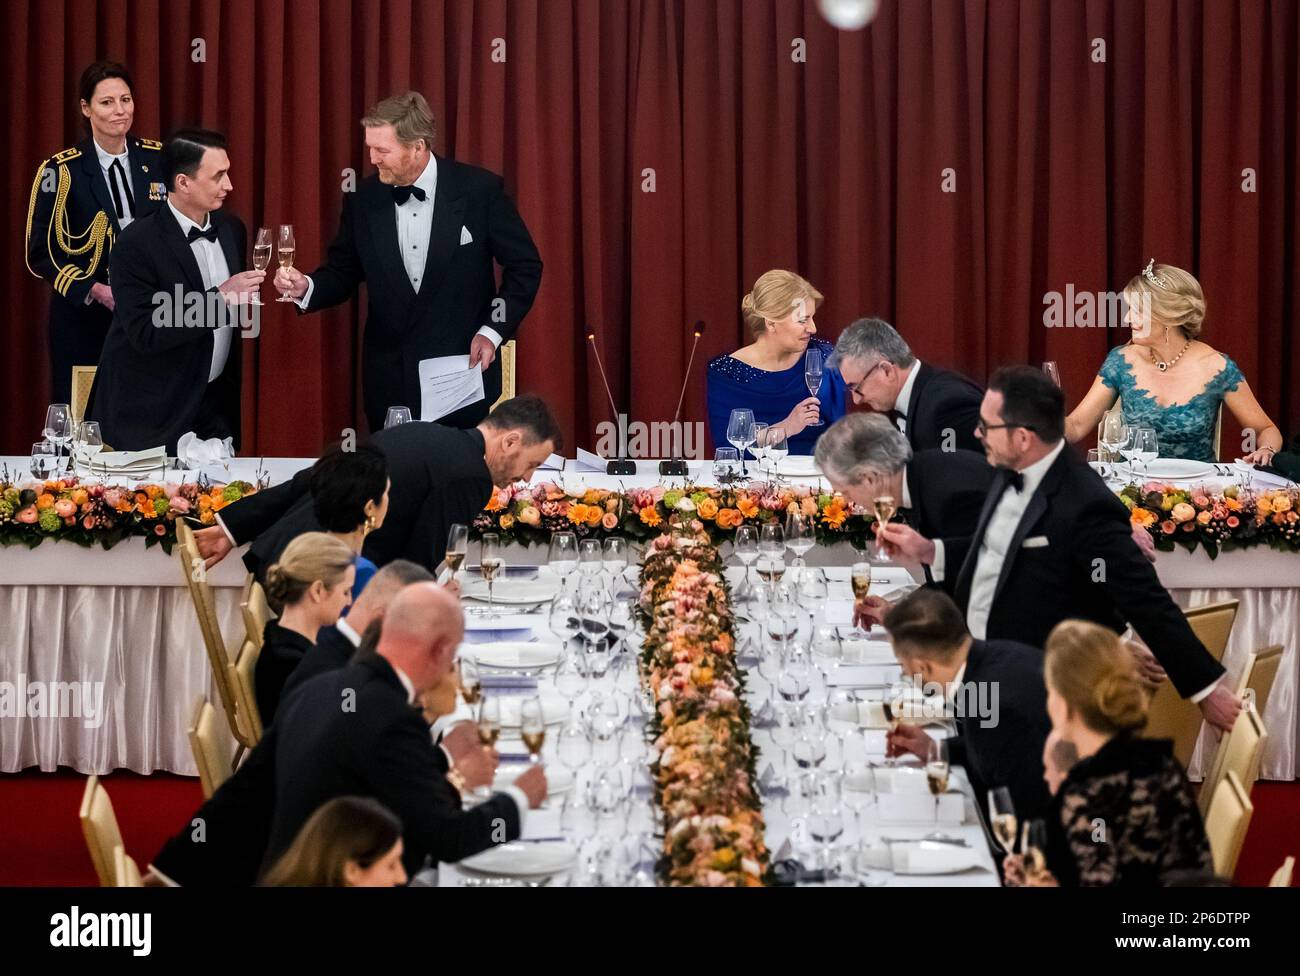 BRATISLAVA - King Willem-Alexander toasts during the state banquet on the first day of the three-day state visit to Slovakia. ANP REMKO DE WAAL netherlands out - belgium out Stock Photo